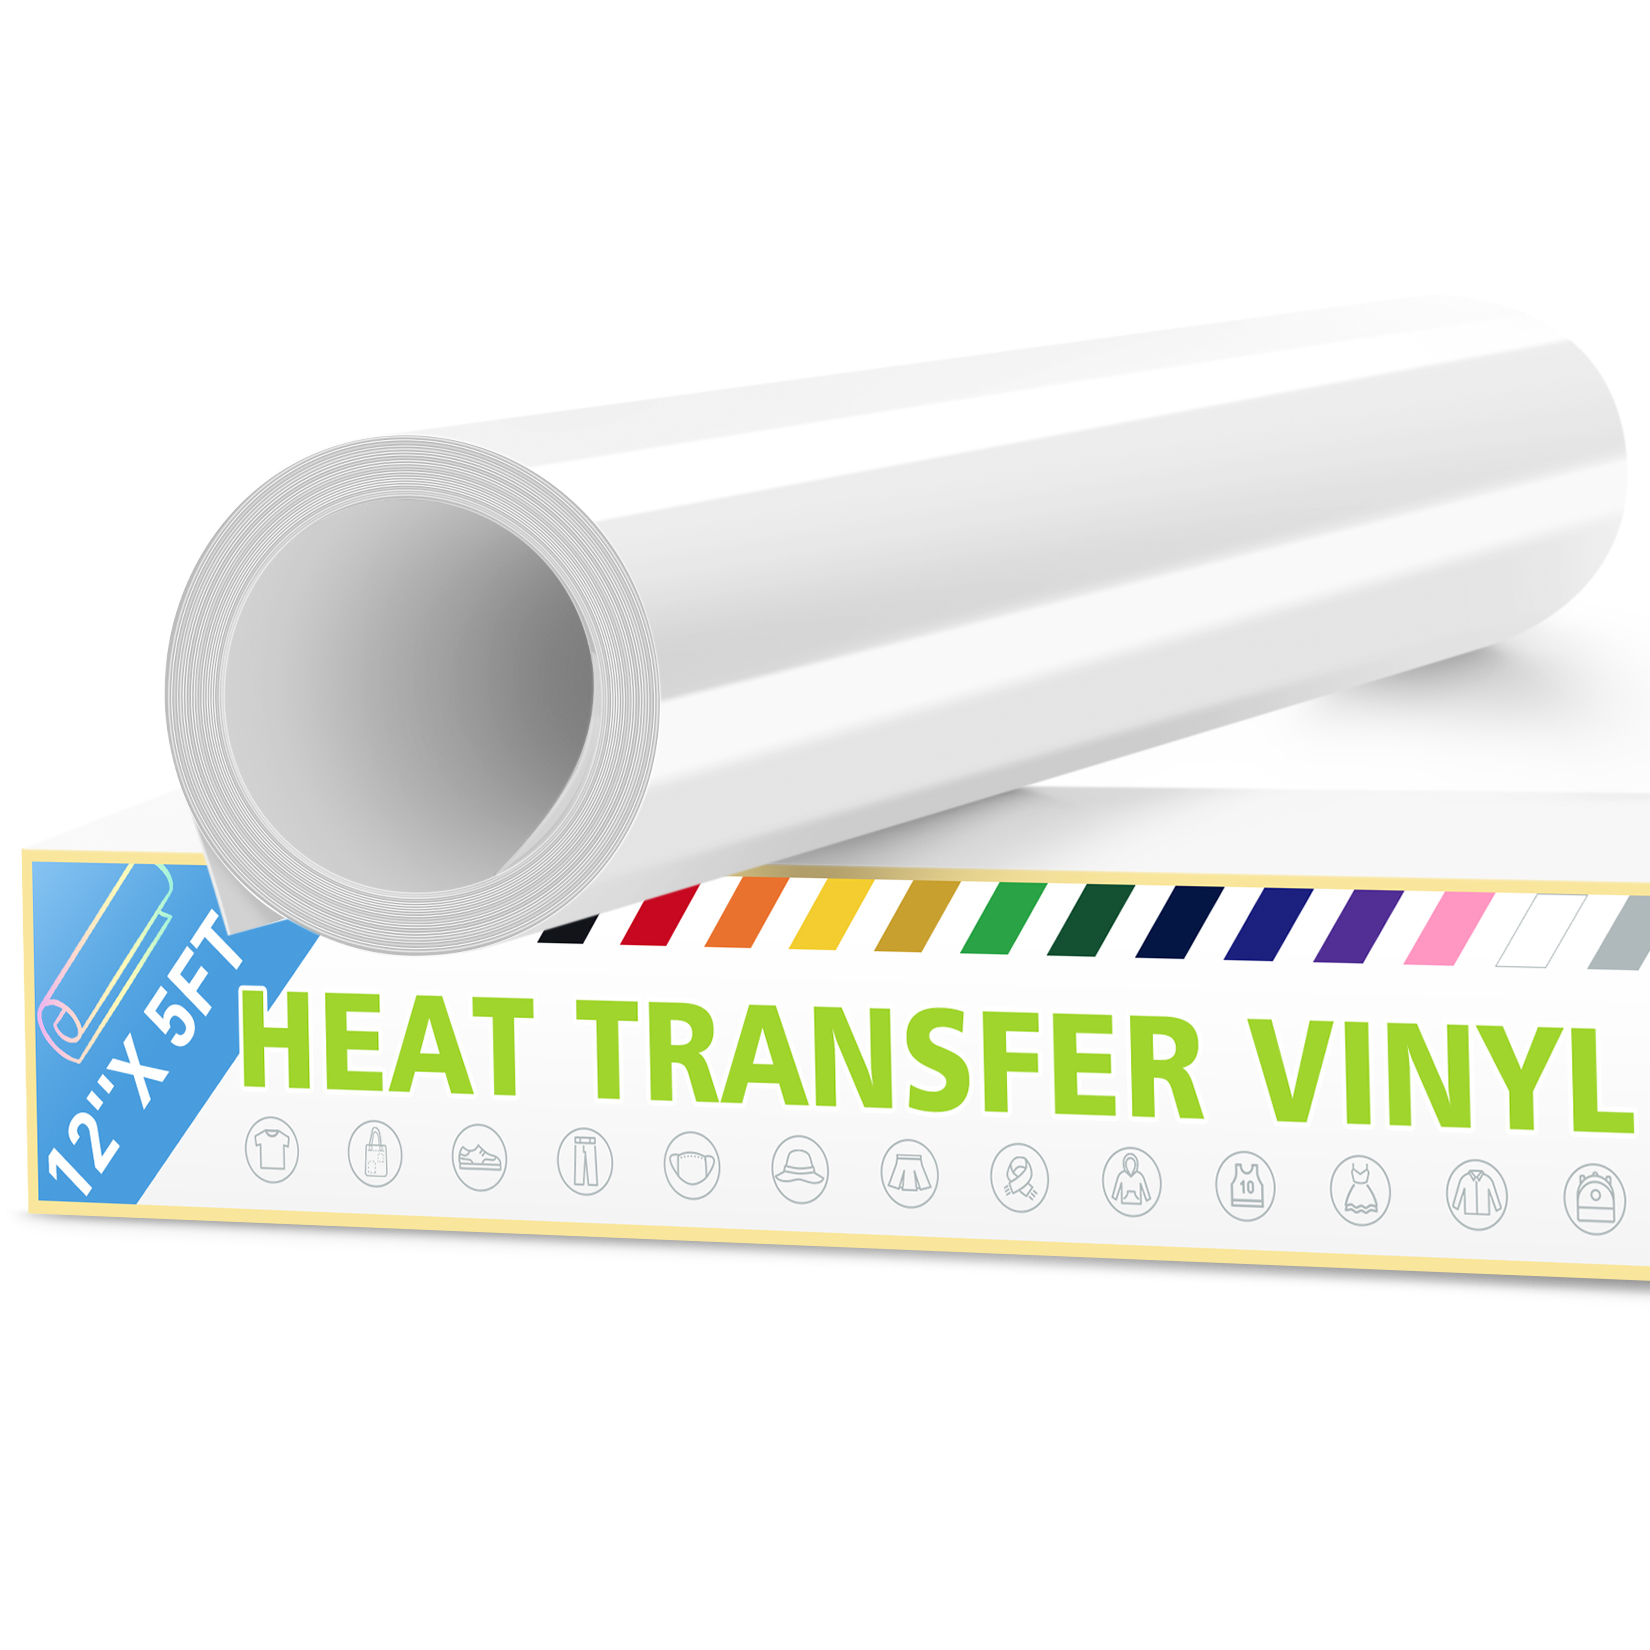 White Iron on Vinyl Roll - 12 x 25ft Heat Transfer Vinyl for Cricut &  Silhouette Cameo, Clothing Heavy Duty White HTV Vinyl, Easy Cutting &  Weeding Arts, Crafts & Sewing